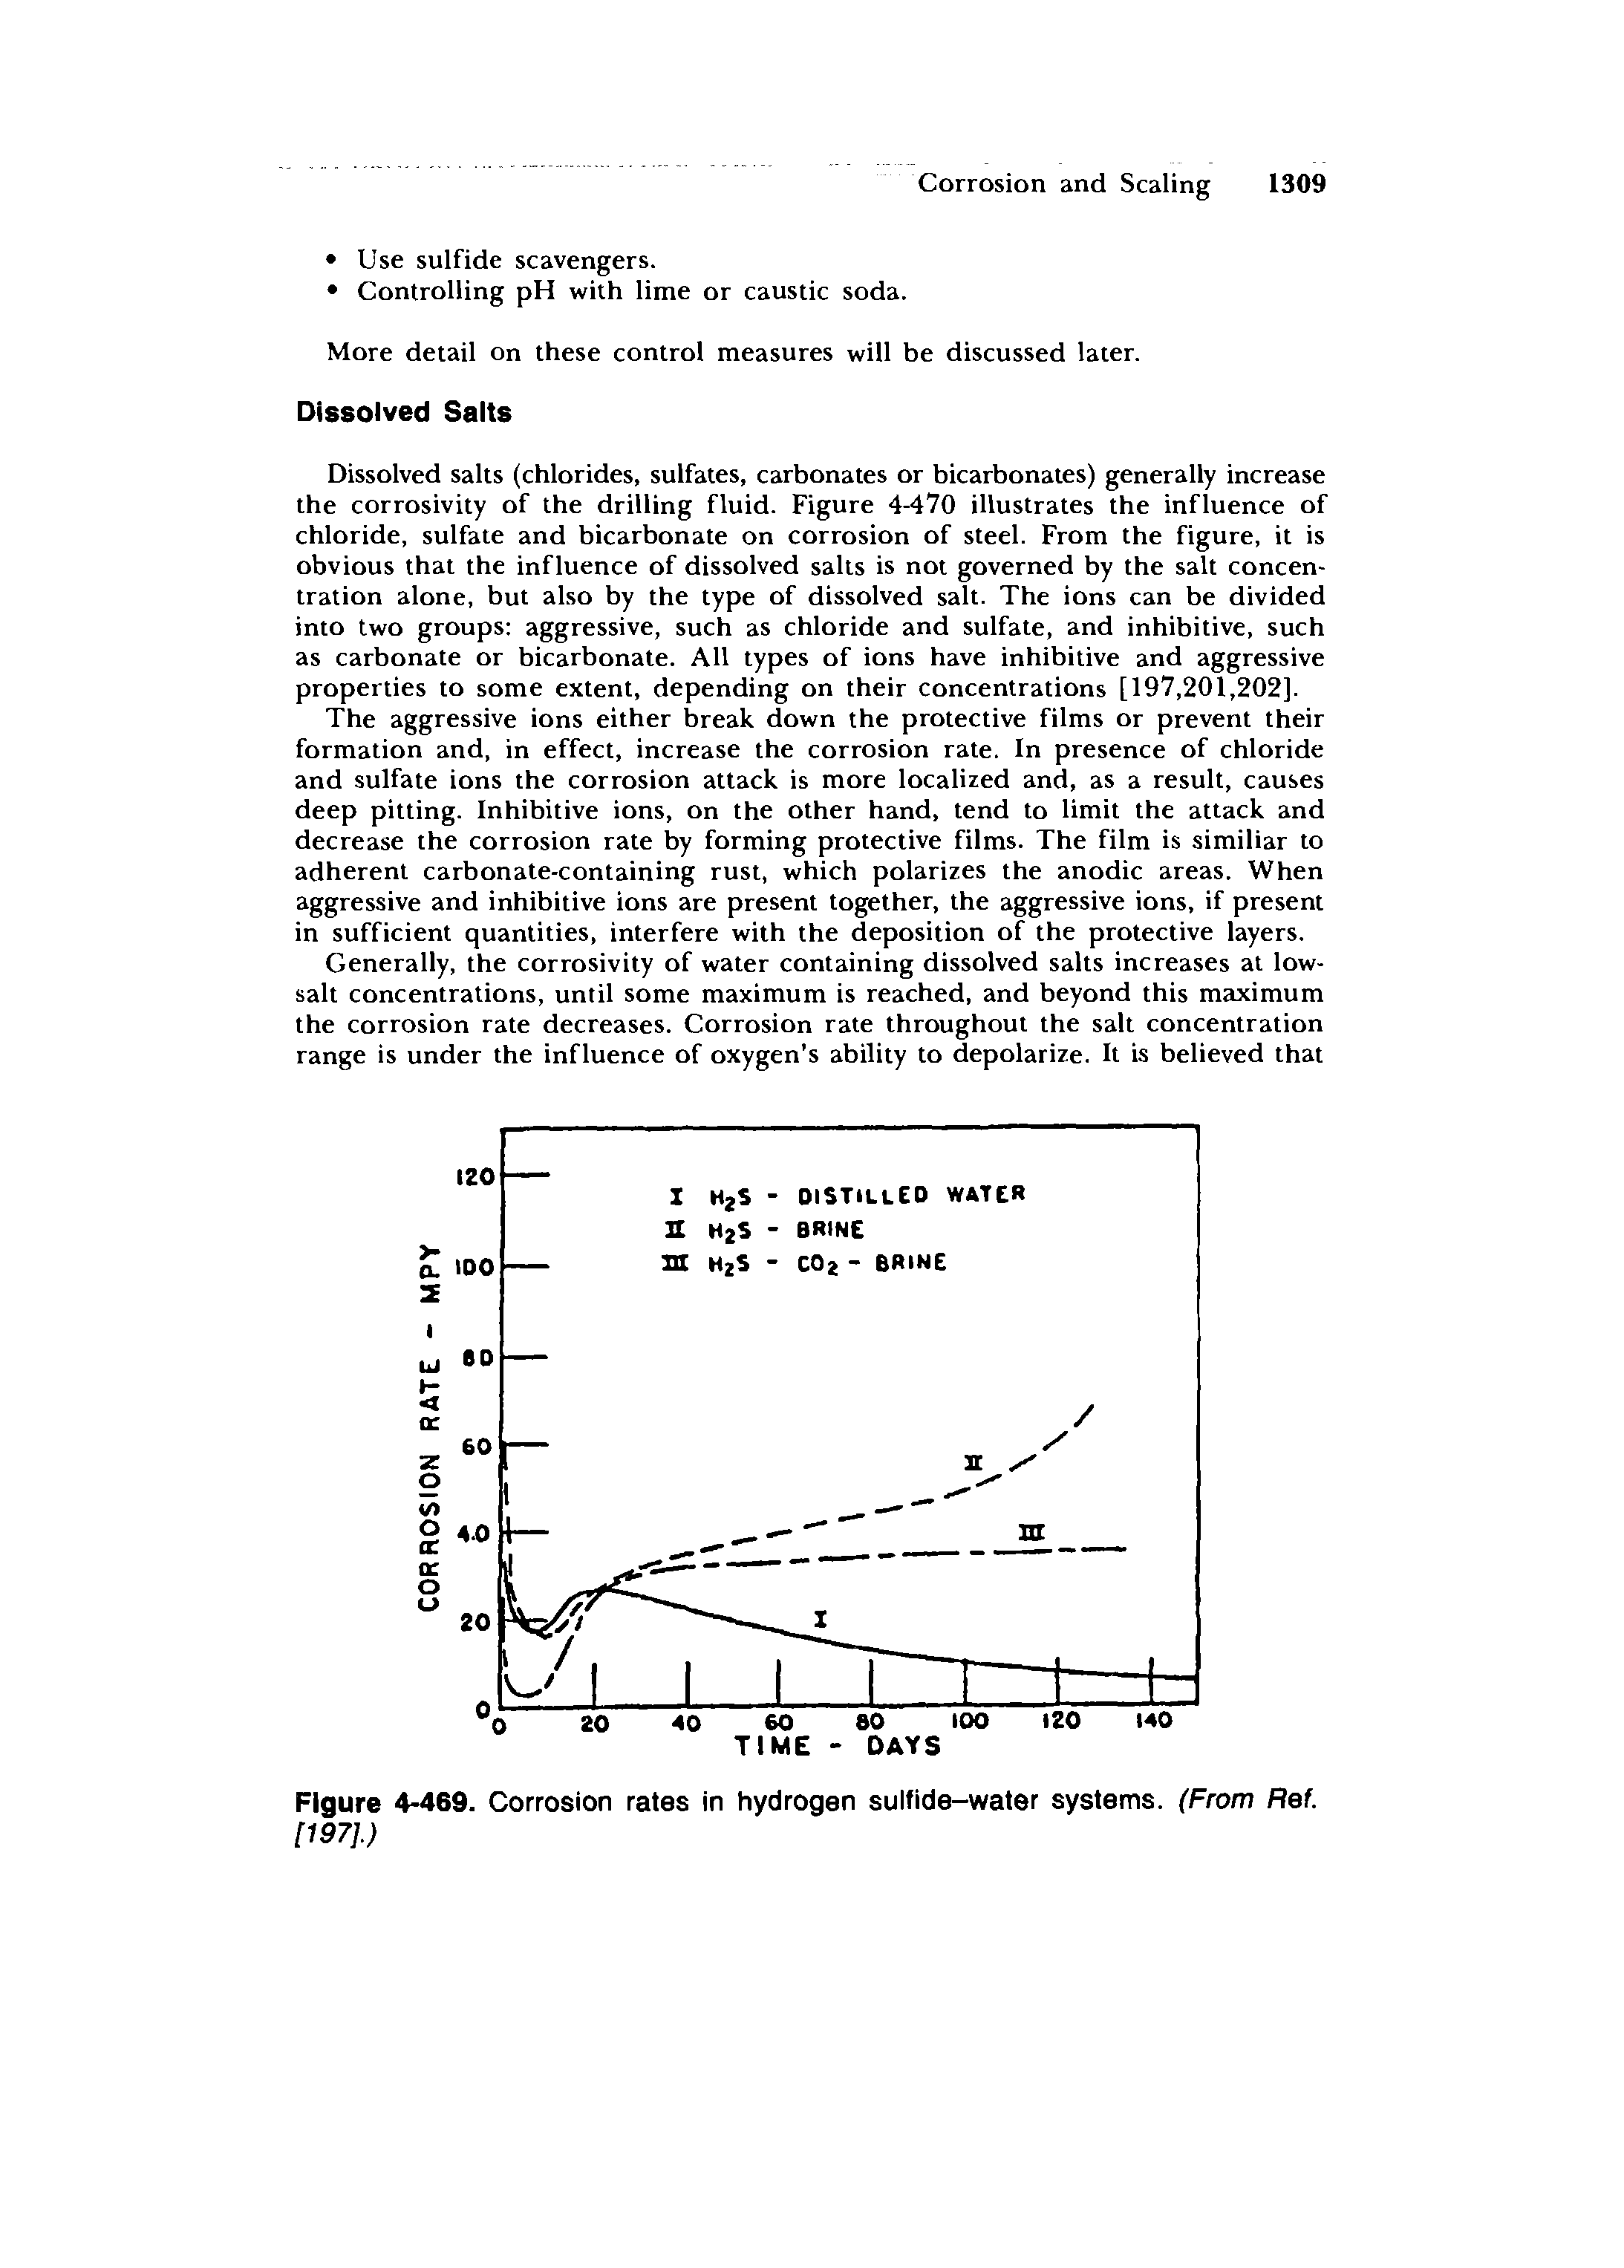 Figure 4-469. Corrosion rates in hydrogen sulfide-water systems. (From Ref. [197].)...